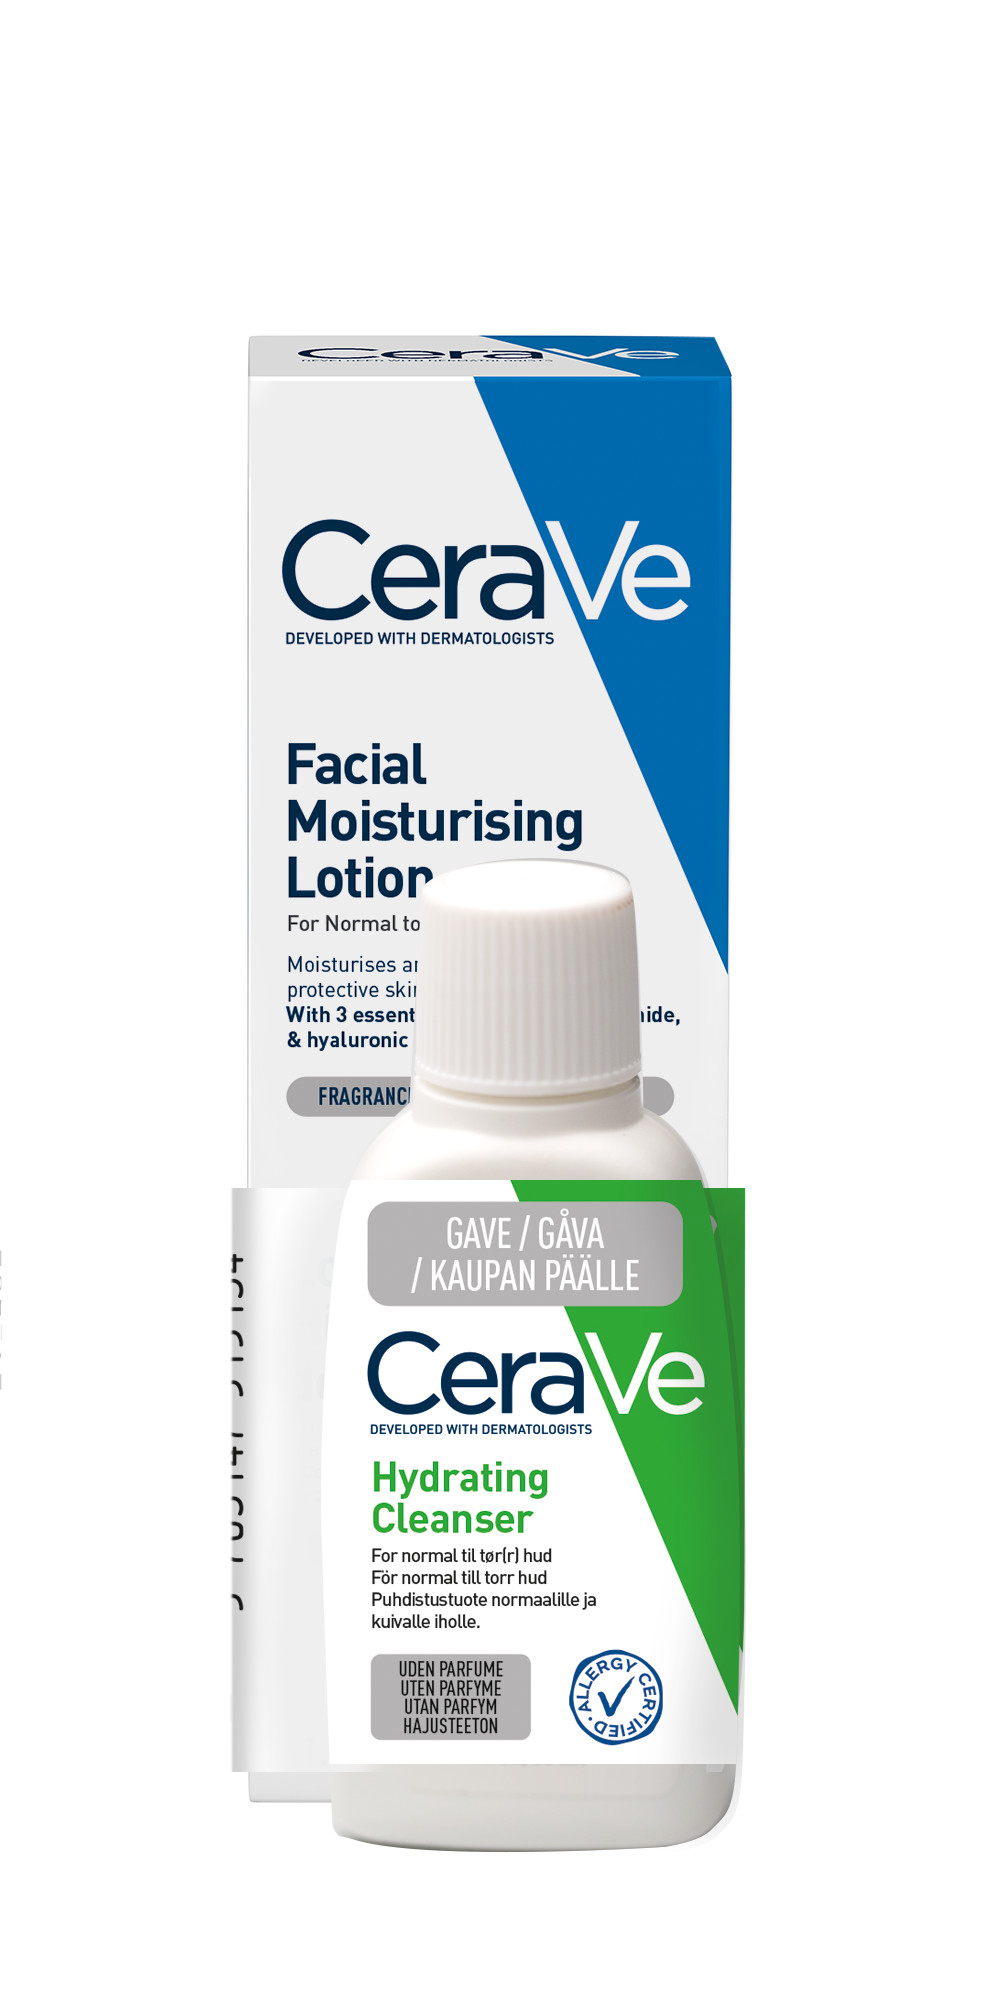 CeraVe Facial Moisturising Lotion 52 ml + Hydrating Cleanser 20 ml